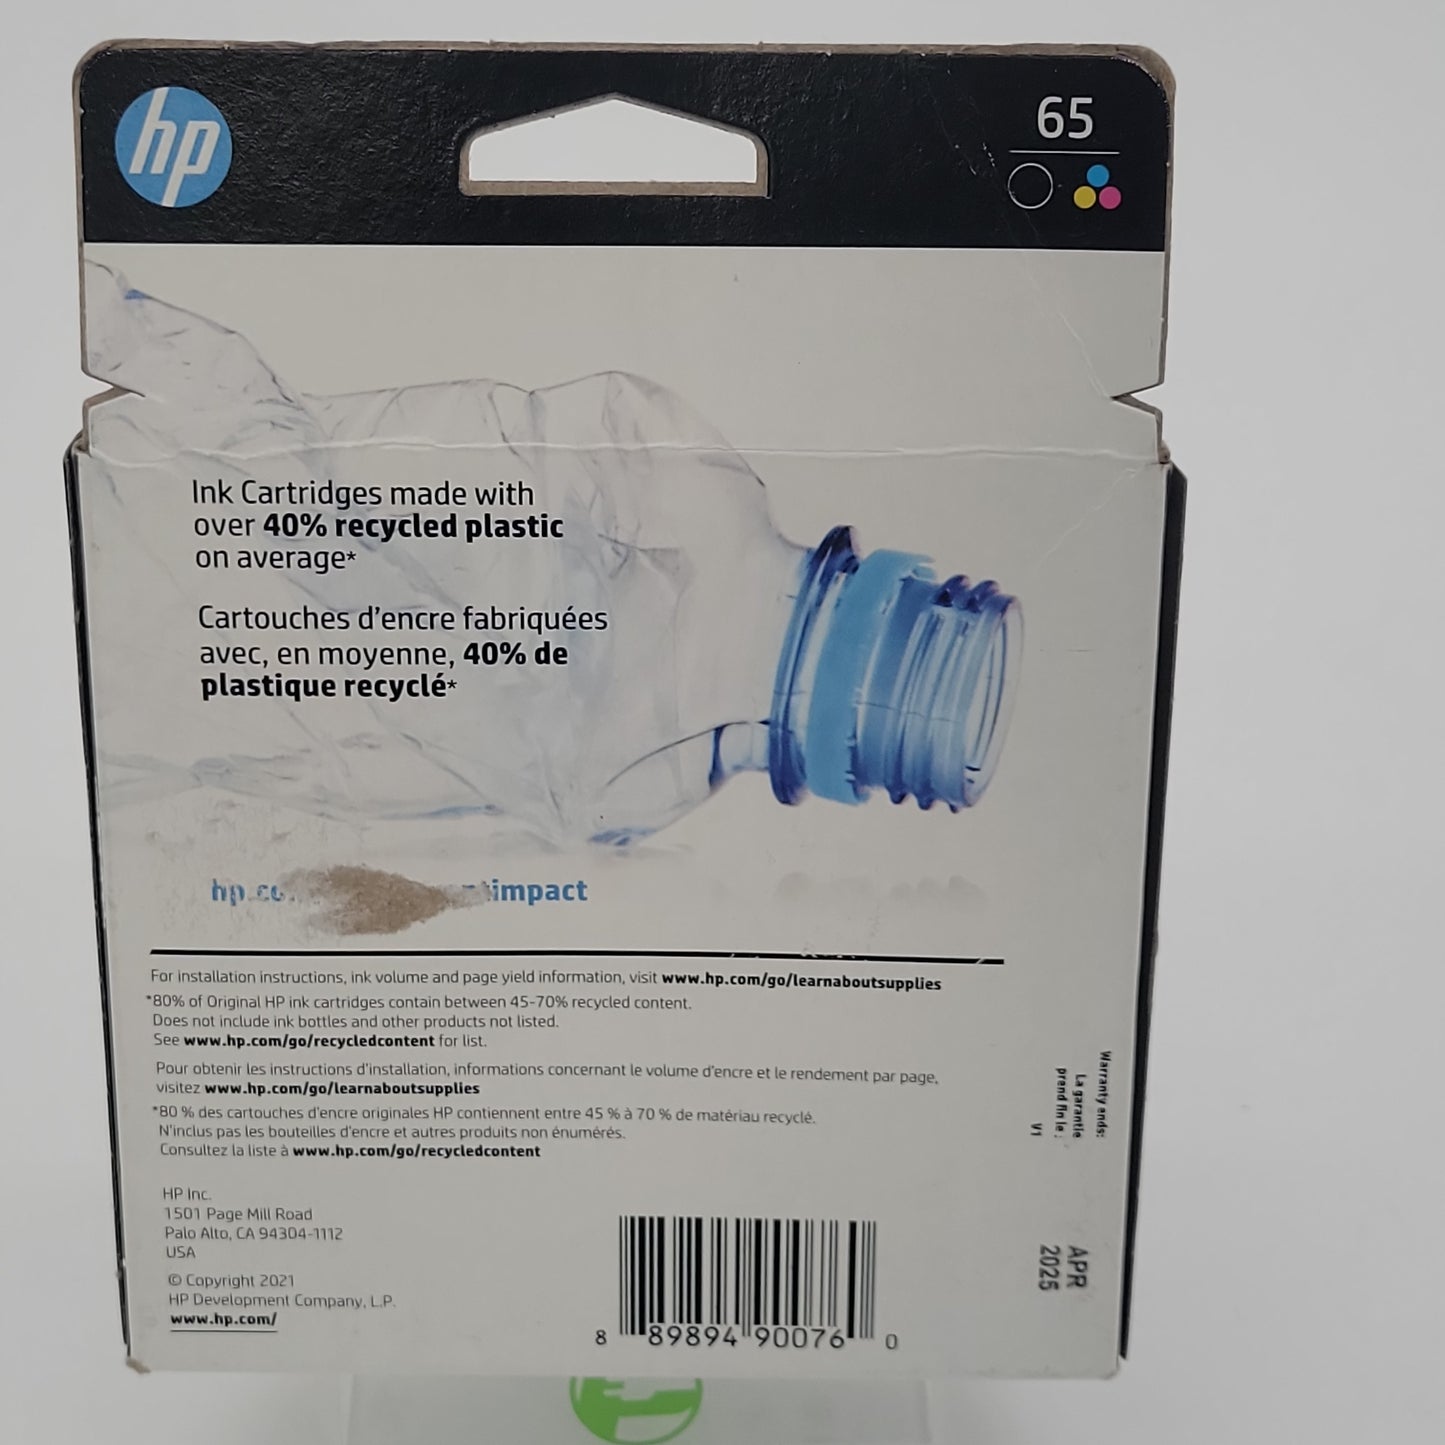 New HP 65 T0A36AN Black/Tri-color  Ink Cartridge